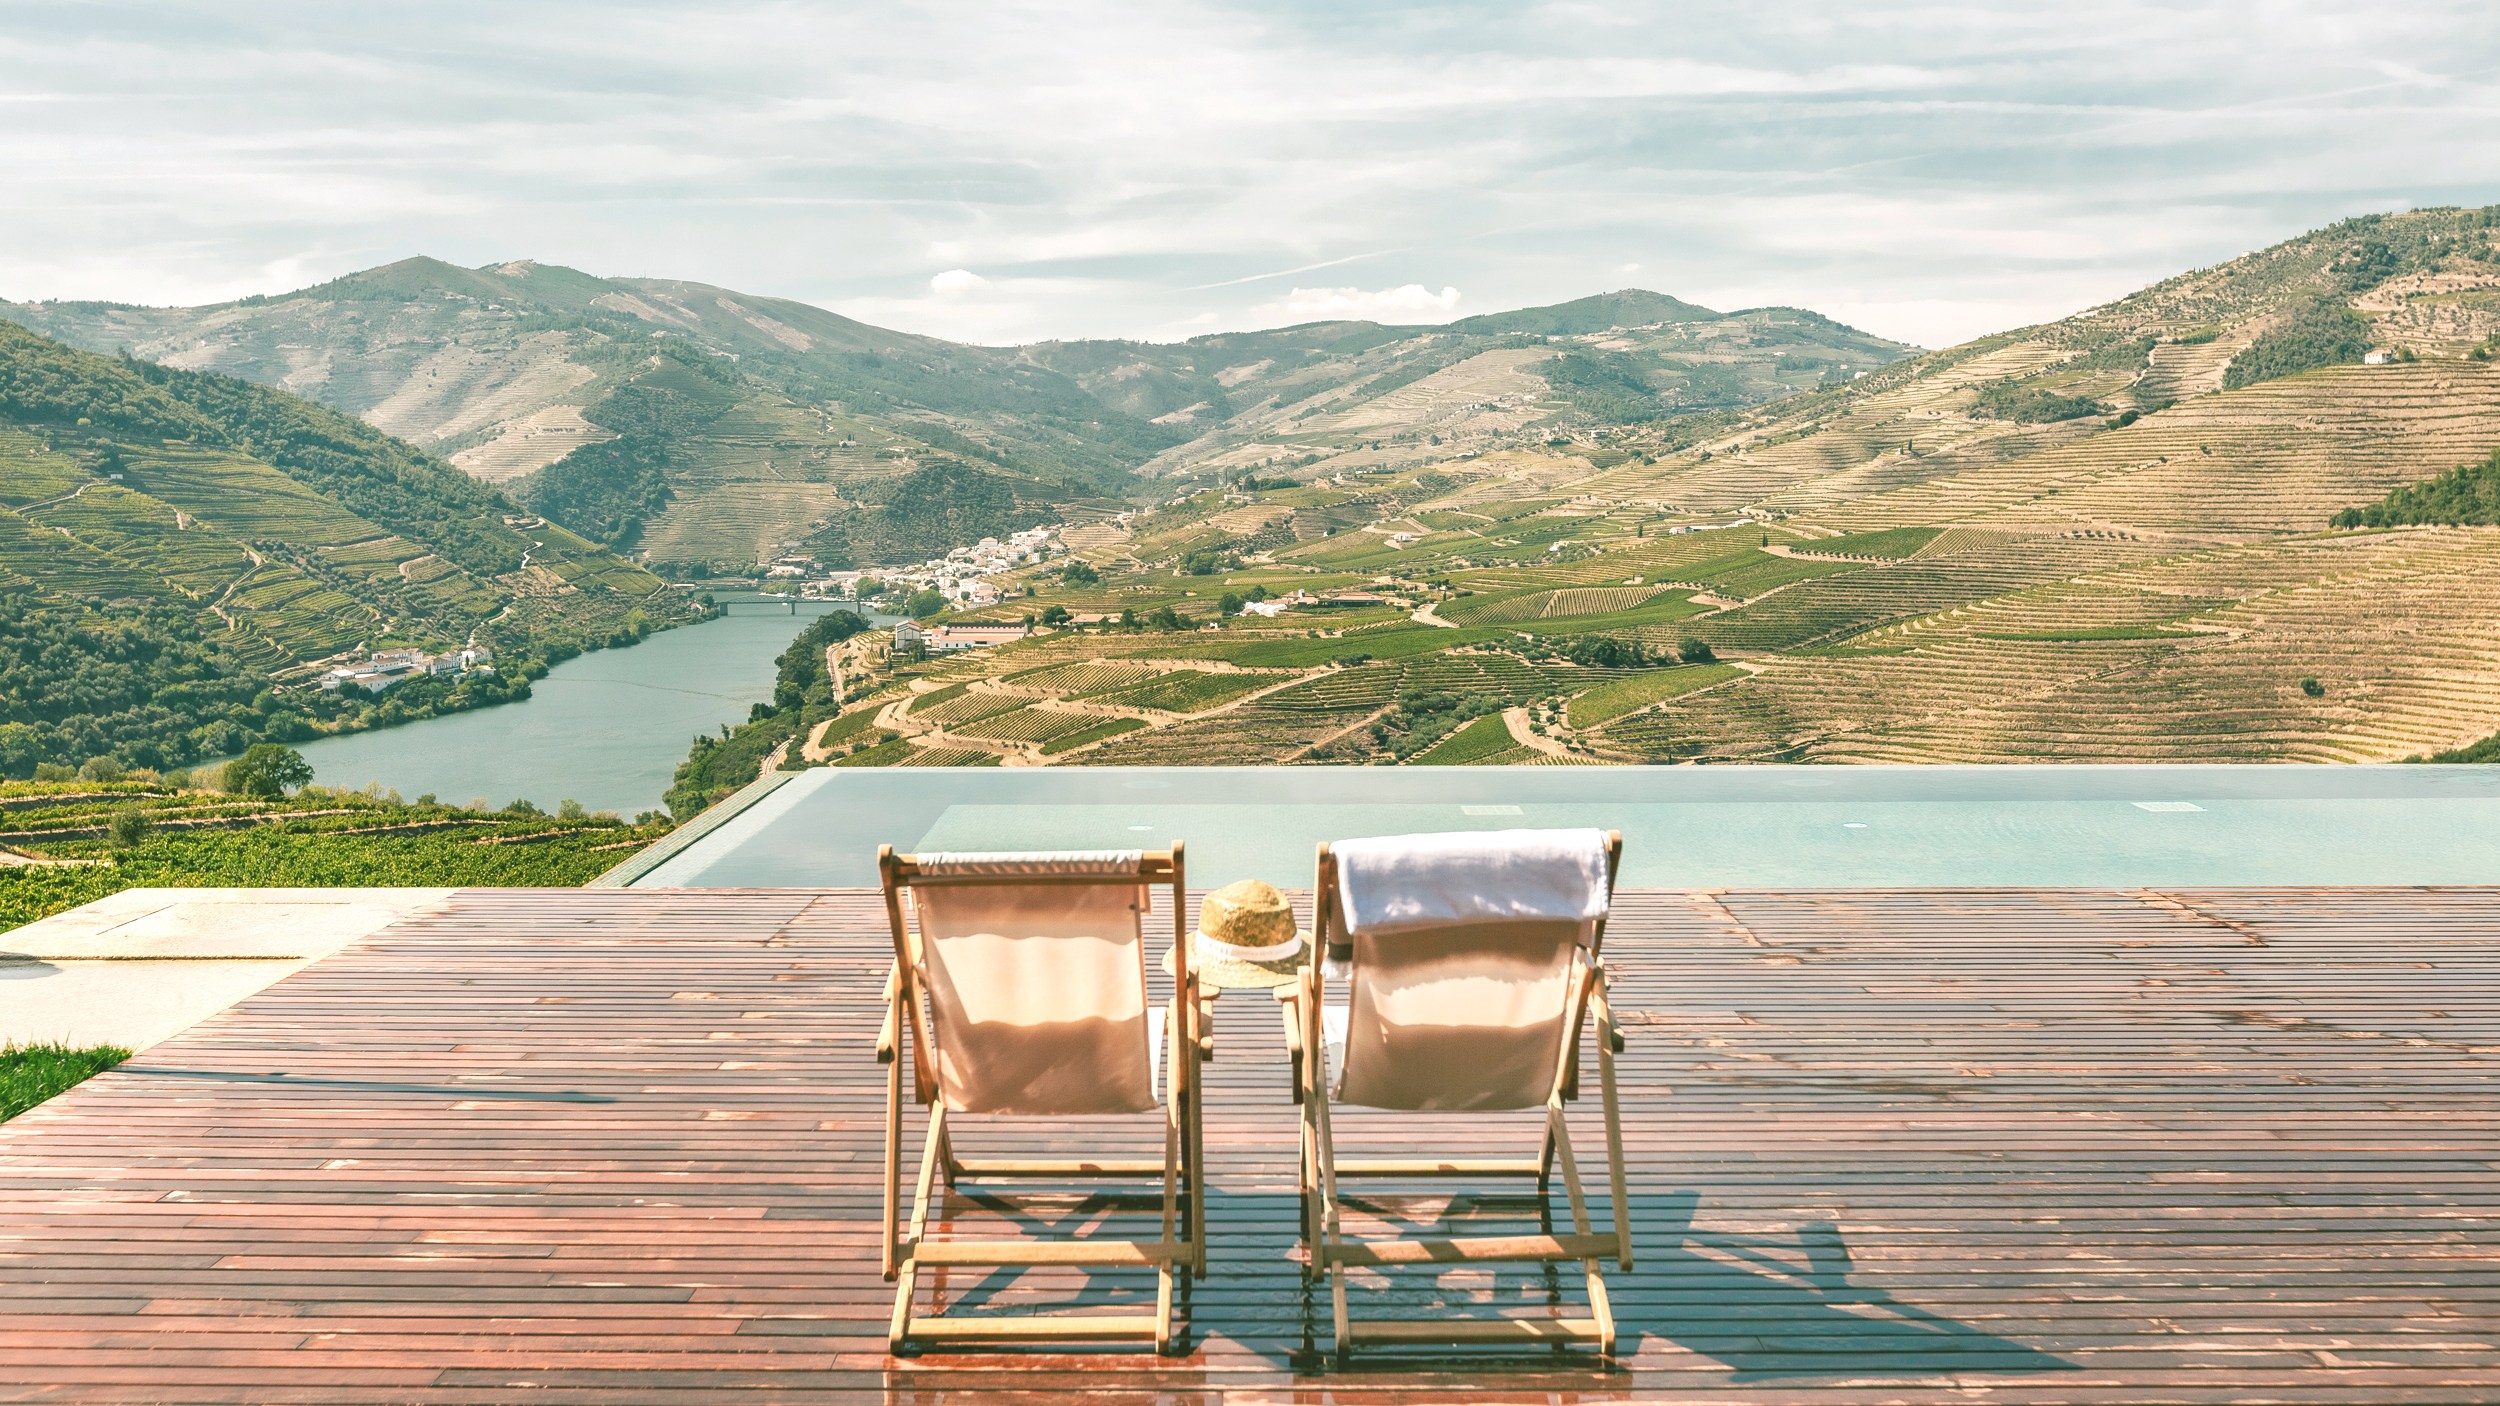 Ventozelo Hotel & Quinta is one of the oldest and largest estates in the Douro Valley